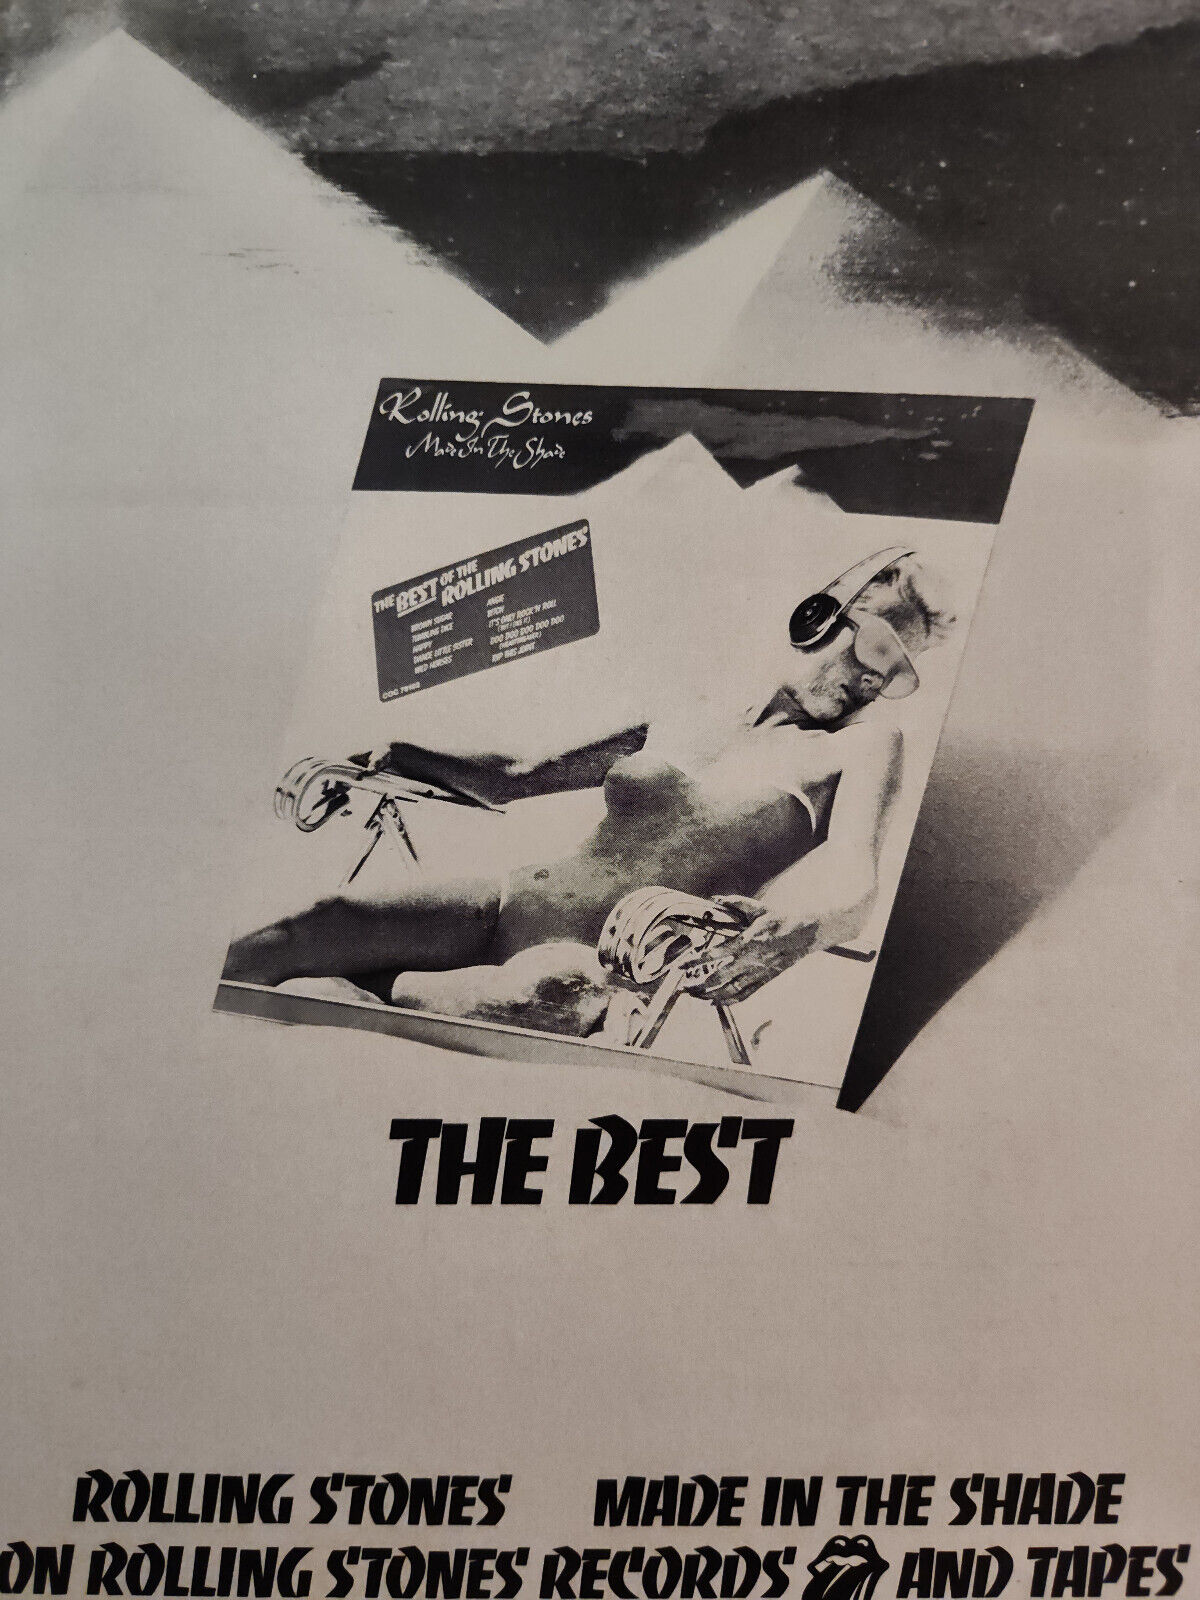 Vintage Ad Advertisement The Best ROLLING STONES album Made in the Shade